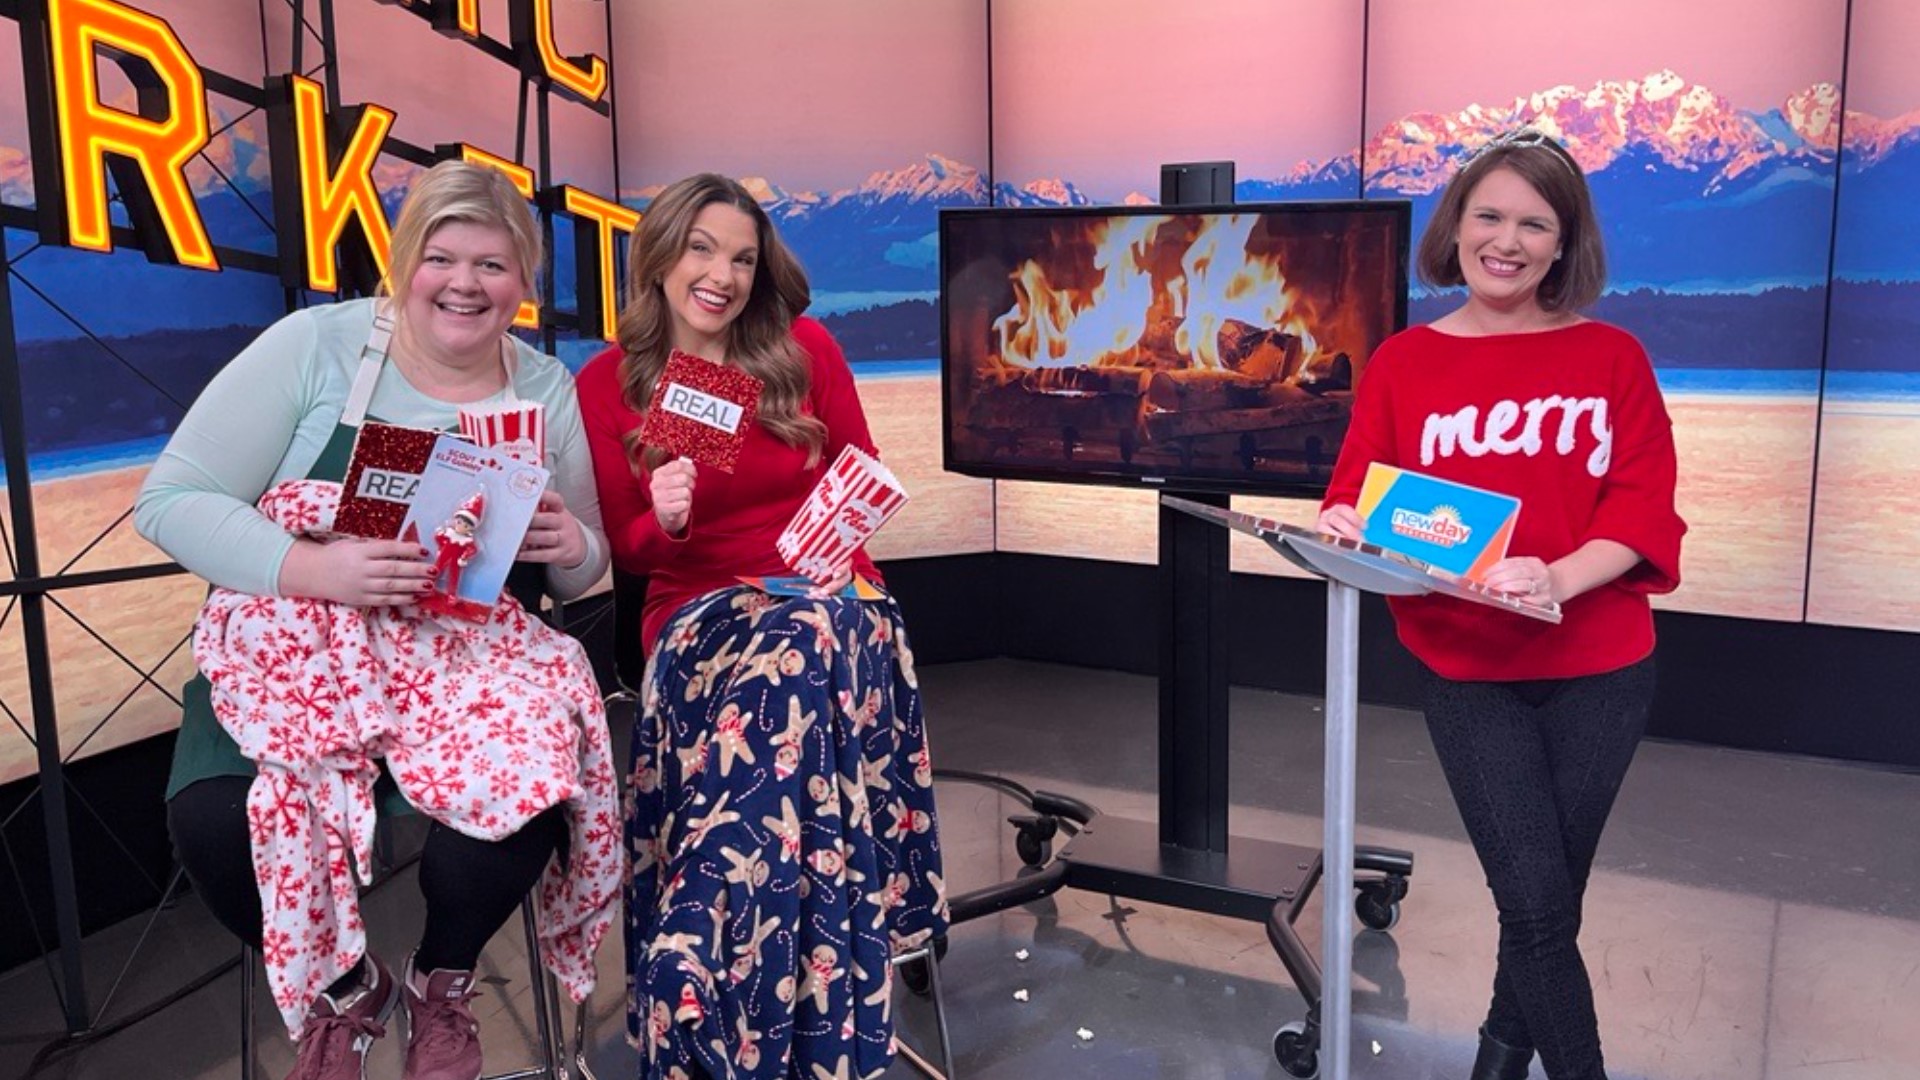 Cookbook author Danielle Kartes and Amity team up once again to figure out which holiday movie descriptions are real and which ones are fake.